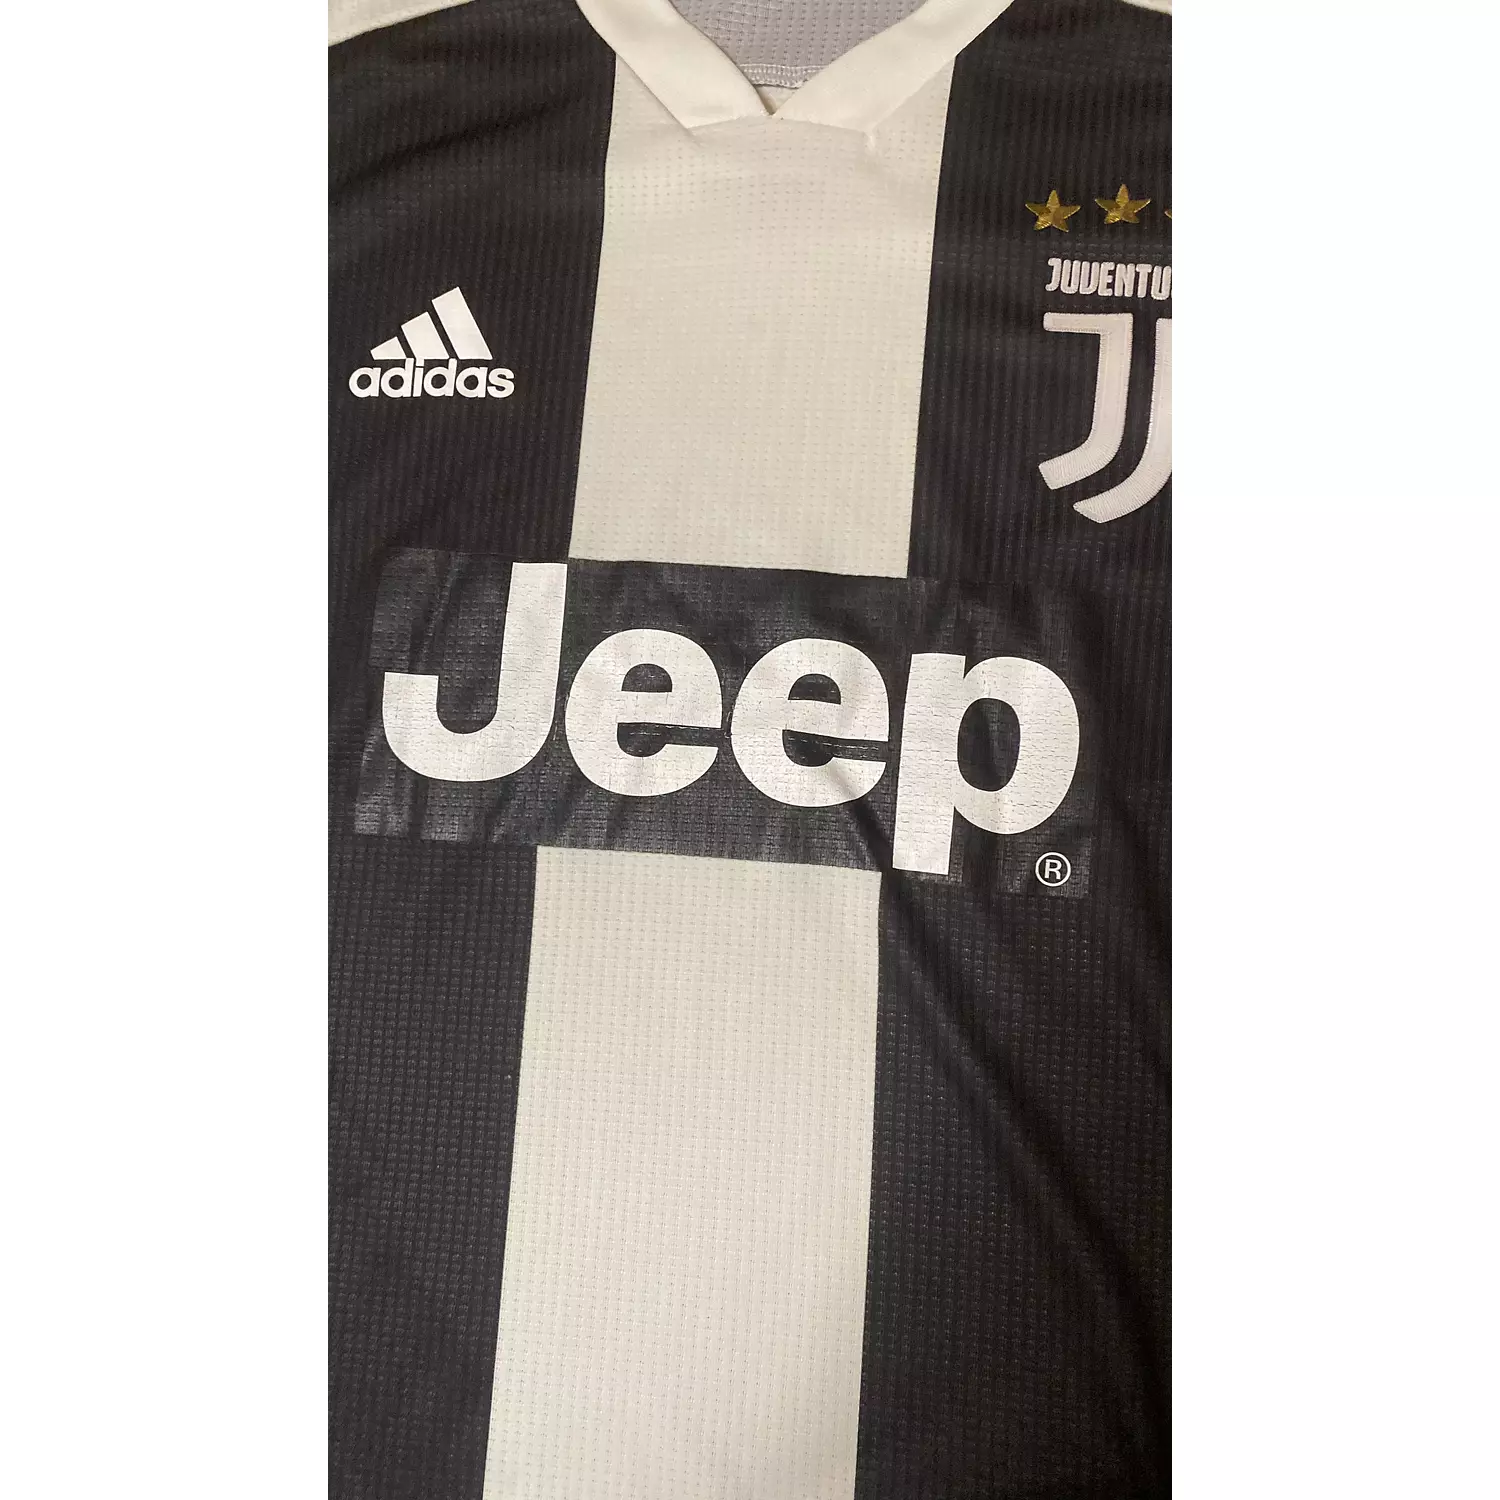 Juventus 2018/19 Home Kit (S) Player Issue 2